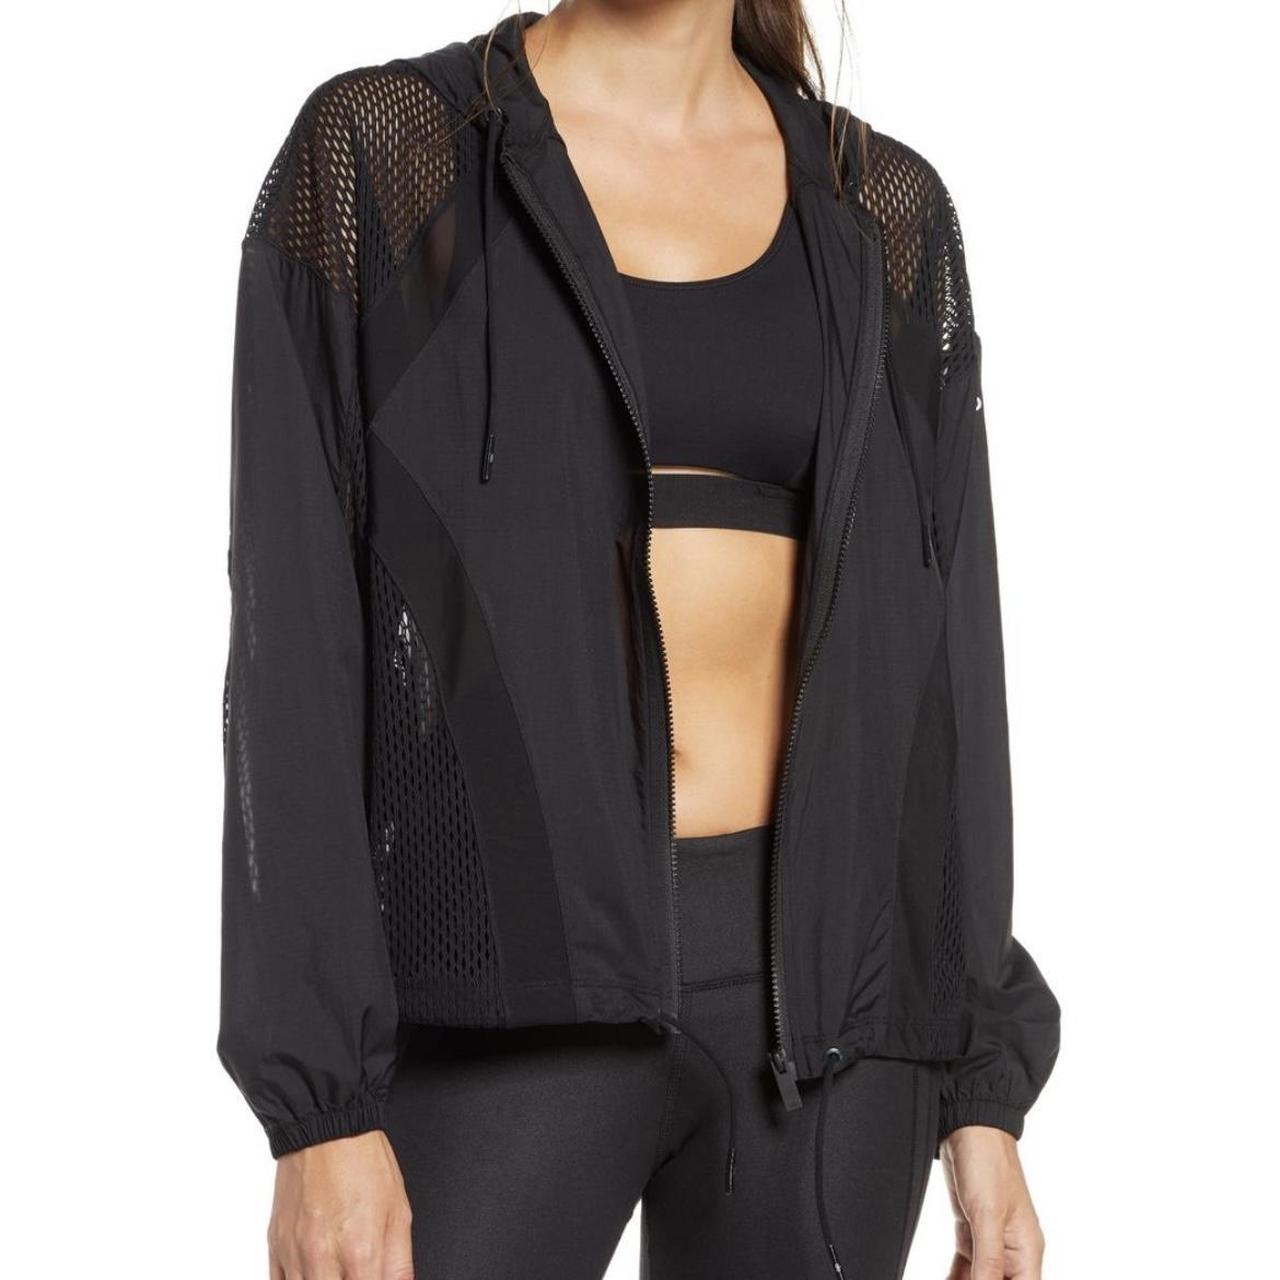 ALO Yoga Feature Mesh Zip-Up Hooded Jacket, Size